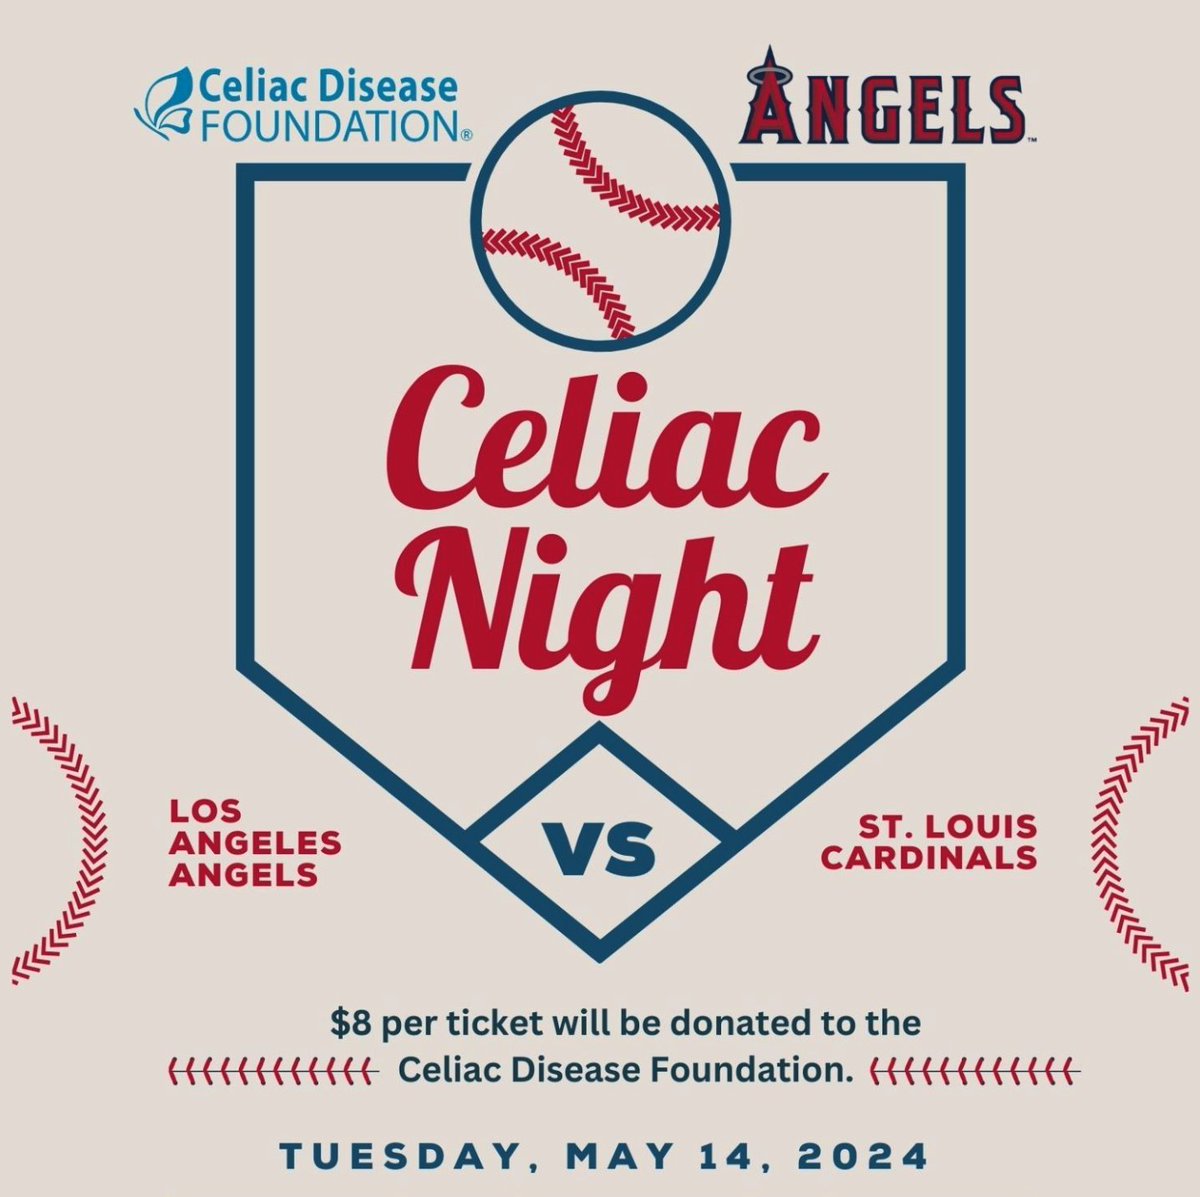 #Baseball fans: Come enjoy a night out for a good cause! On Tuesday, May 14, the Los Angeles @Angels take on the St. Louis @Cardinals at Angel Stadium in Anaheim, California. For each ticket purchased, $8 will be donated to @CeliacDotOrg. fevo-enterprise.com/event/Celiacdi… #mlb #baseball